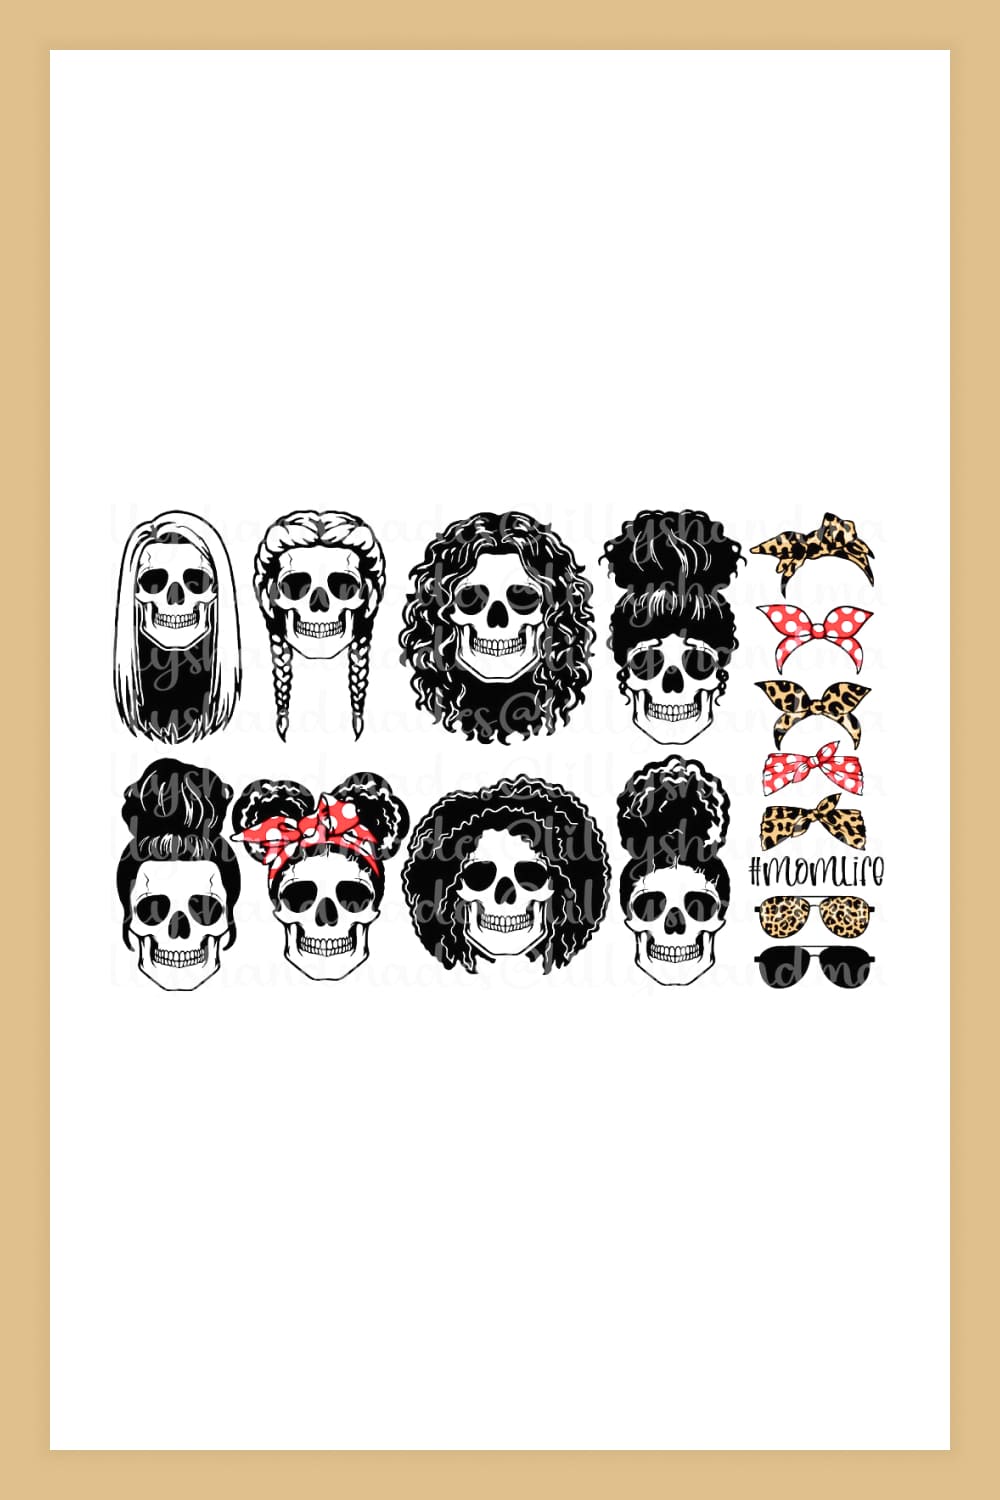 Collage of 8 skulls with women's hairstyles and headscarves.